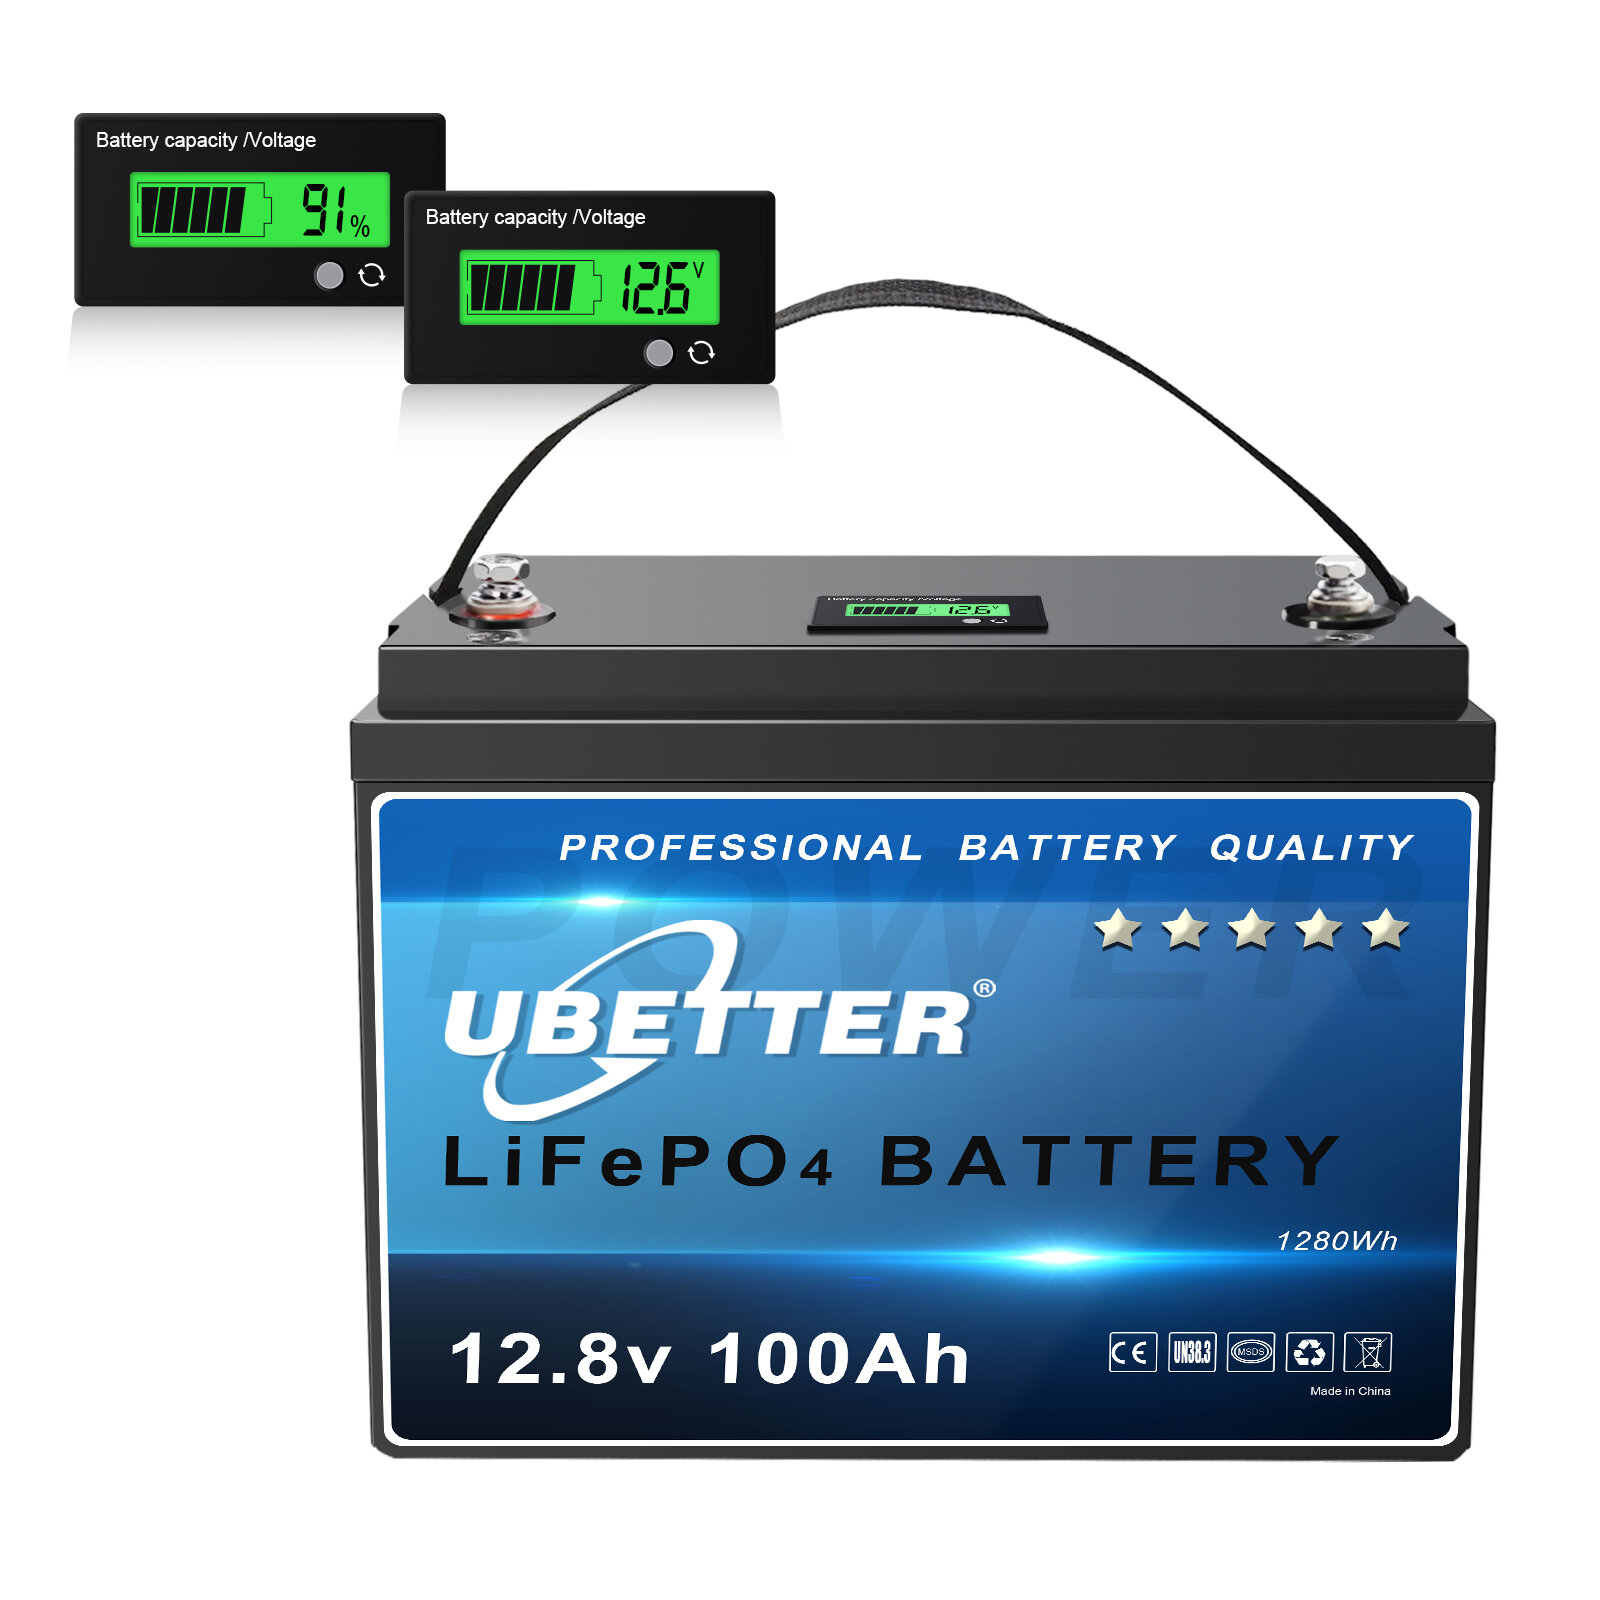 [EU Direct] UBETTER LiFePO4 100Ah Mini 12V Lithium Battery 100A BMS LiFePO4 Battery with 4000+ Cycles and 10 Years, Max. 1280Wh Lithium Battery, Mini Size for Motorhome, RV, Off-Grid System